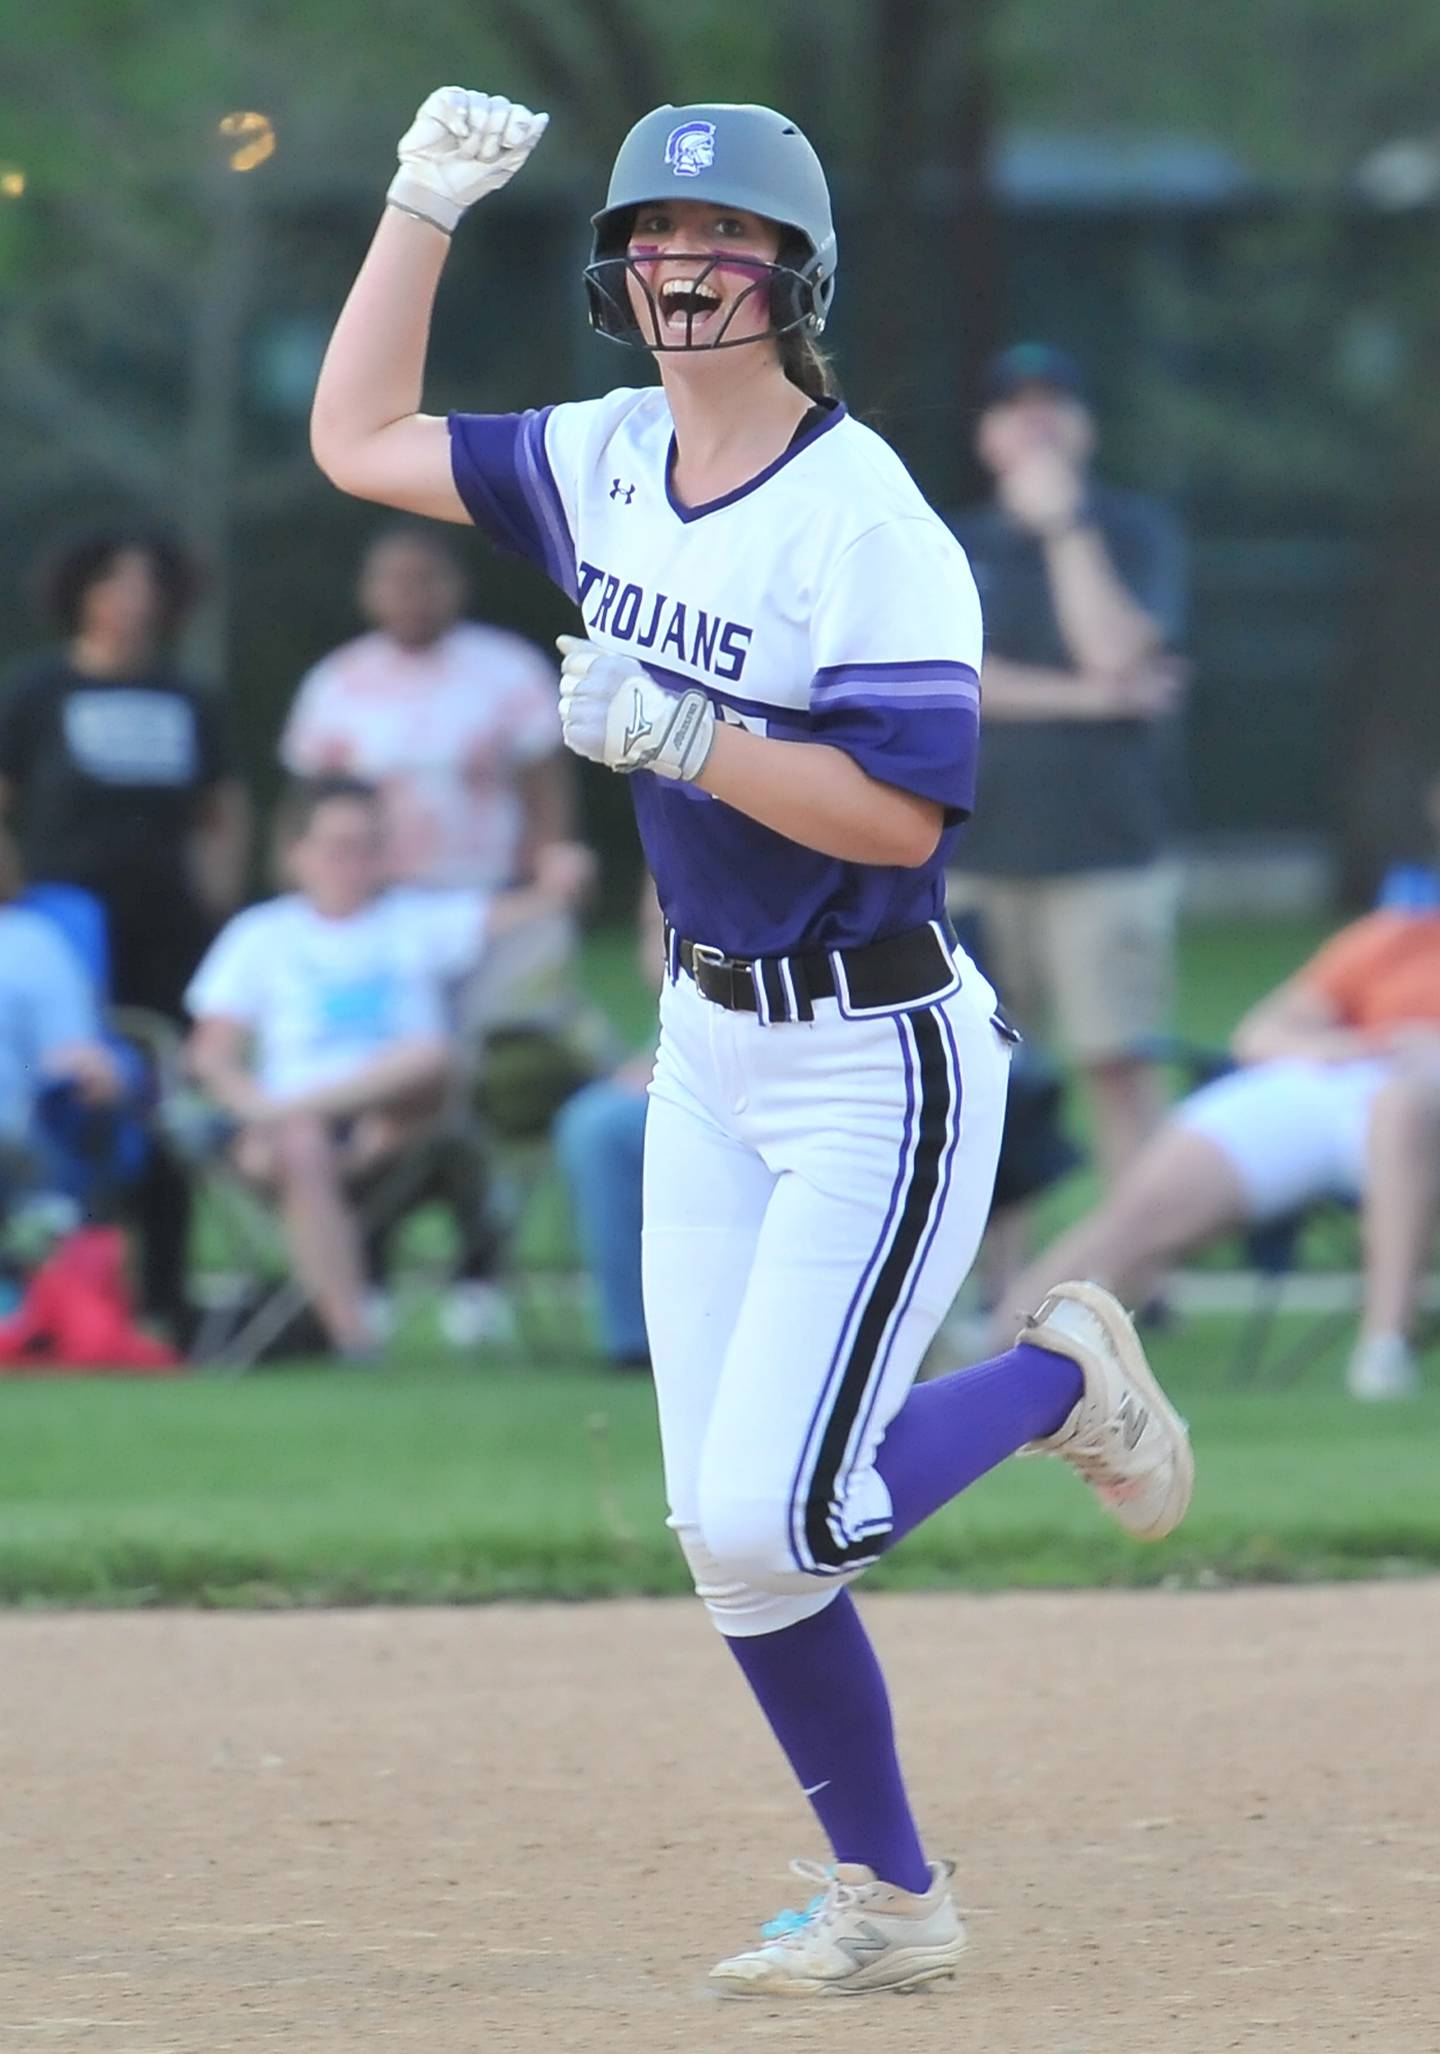 Downers Grove North's Bridget Callaghan rounds the bases after hitting a home run during a game against Downers Grove South on May. 12, 2022 at McCollum Park in Downers Grove.